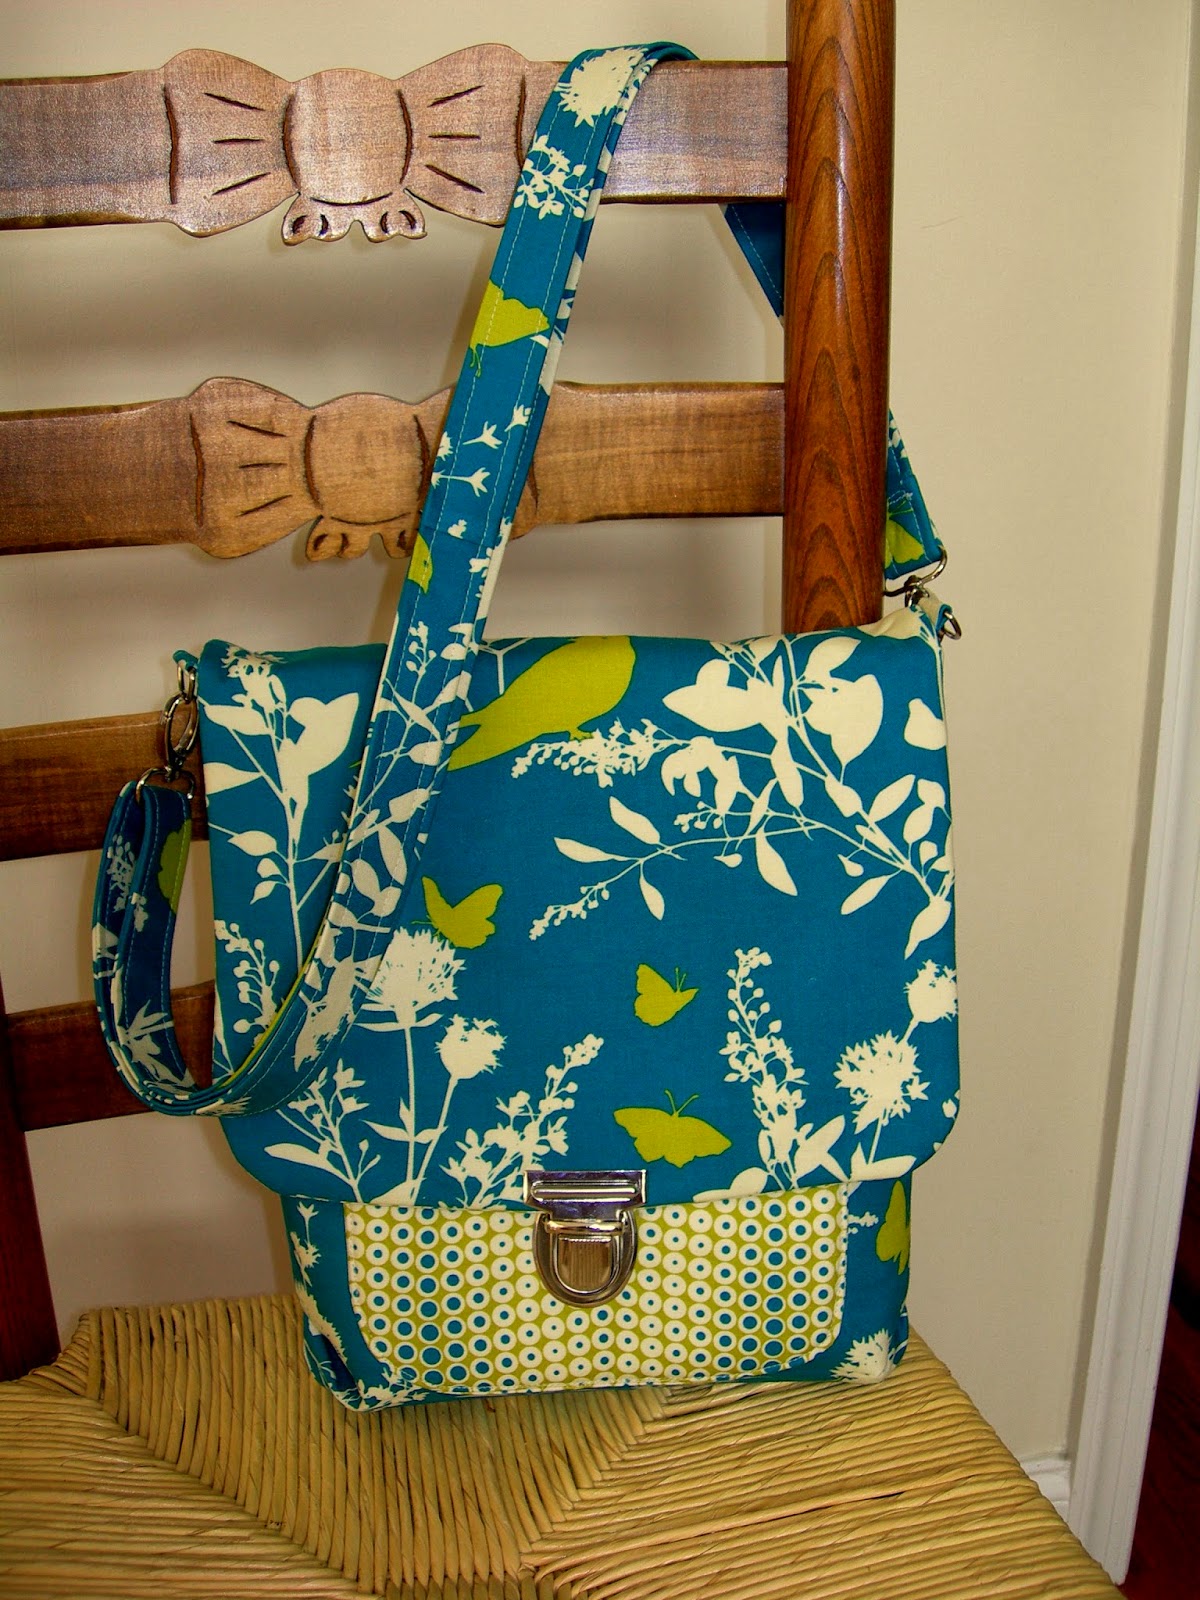 Mrs H - the blog: Tester's bags - Convertible